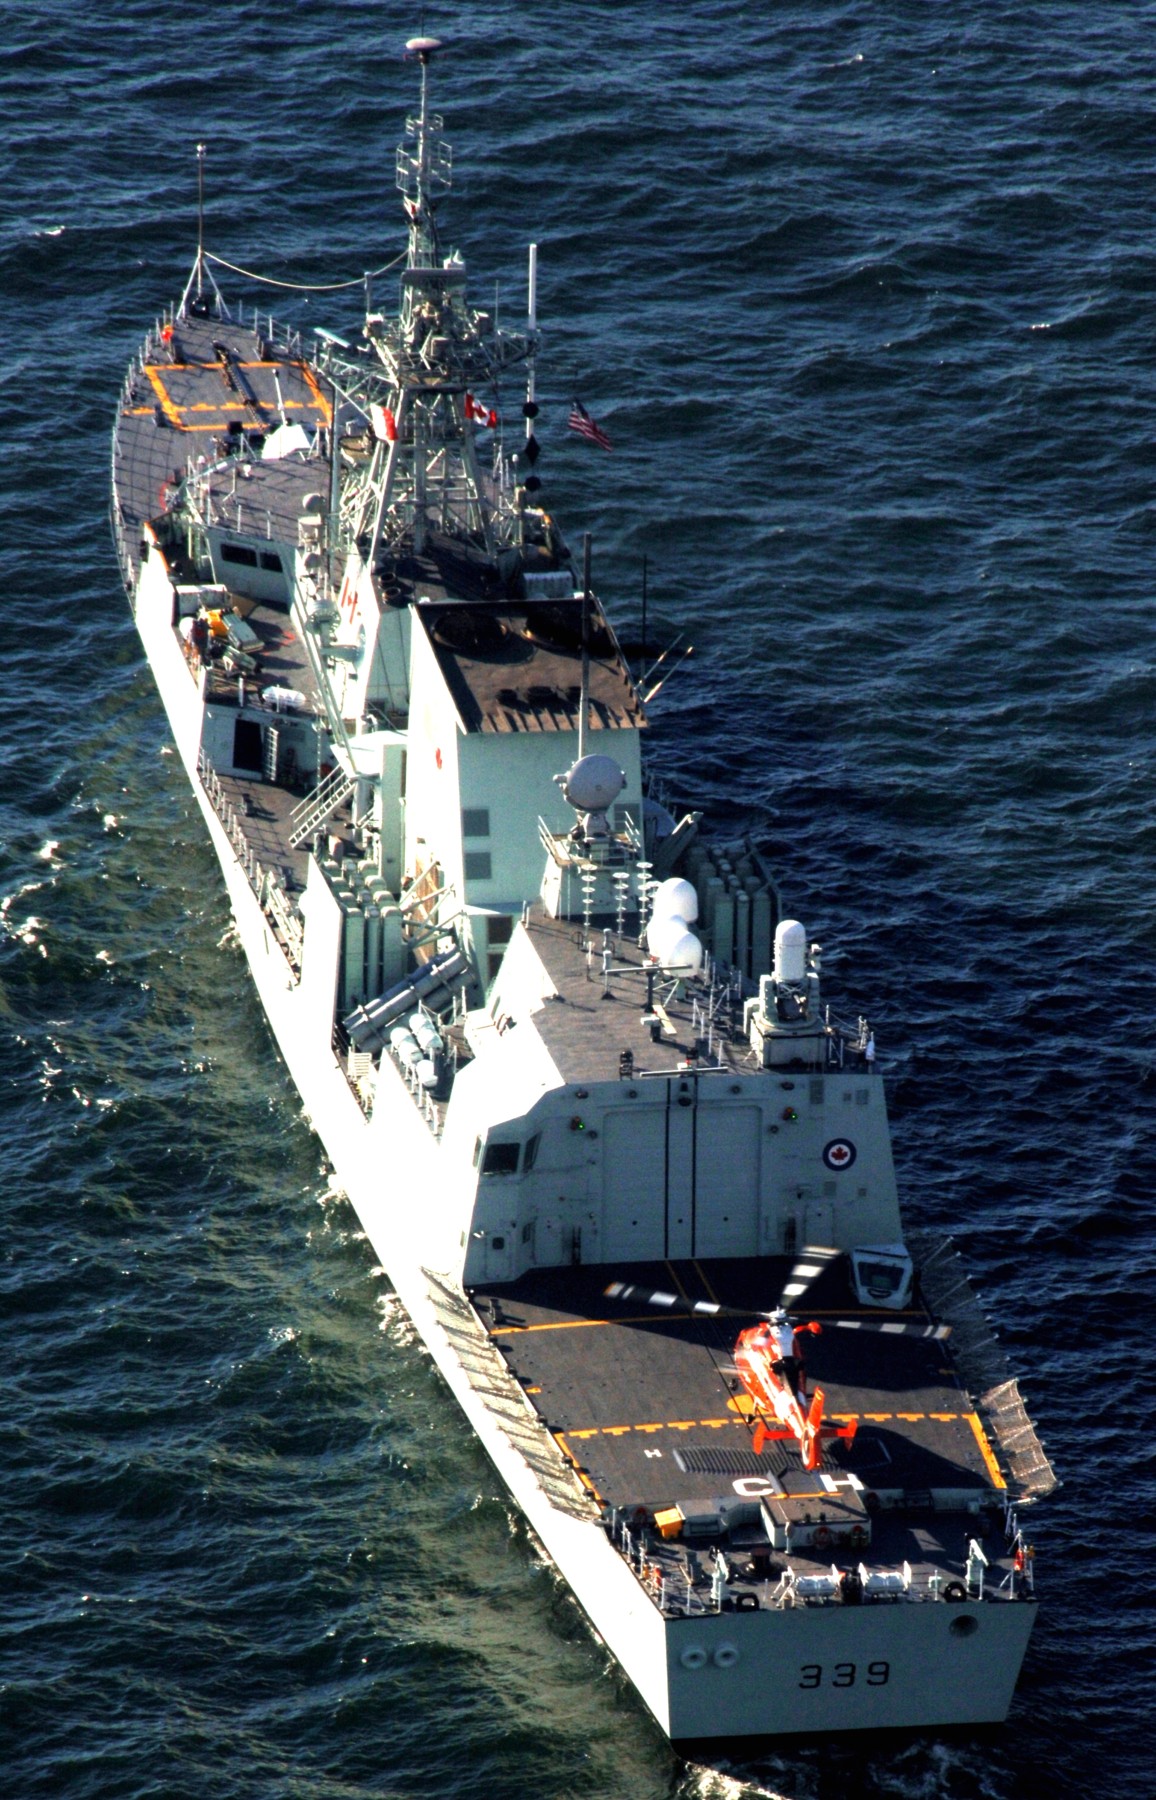 ffh-339 hmcs charlottetown halifax class helicopter patrol frigate ncsm royal canadian navy 02